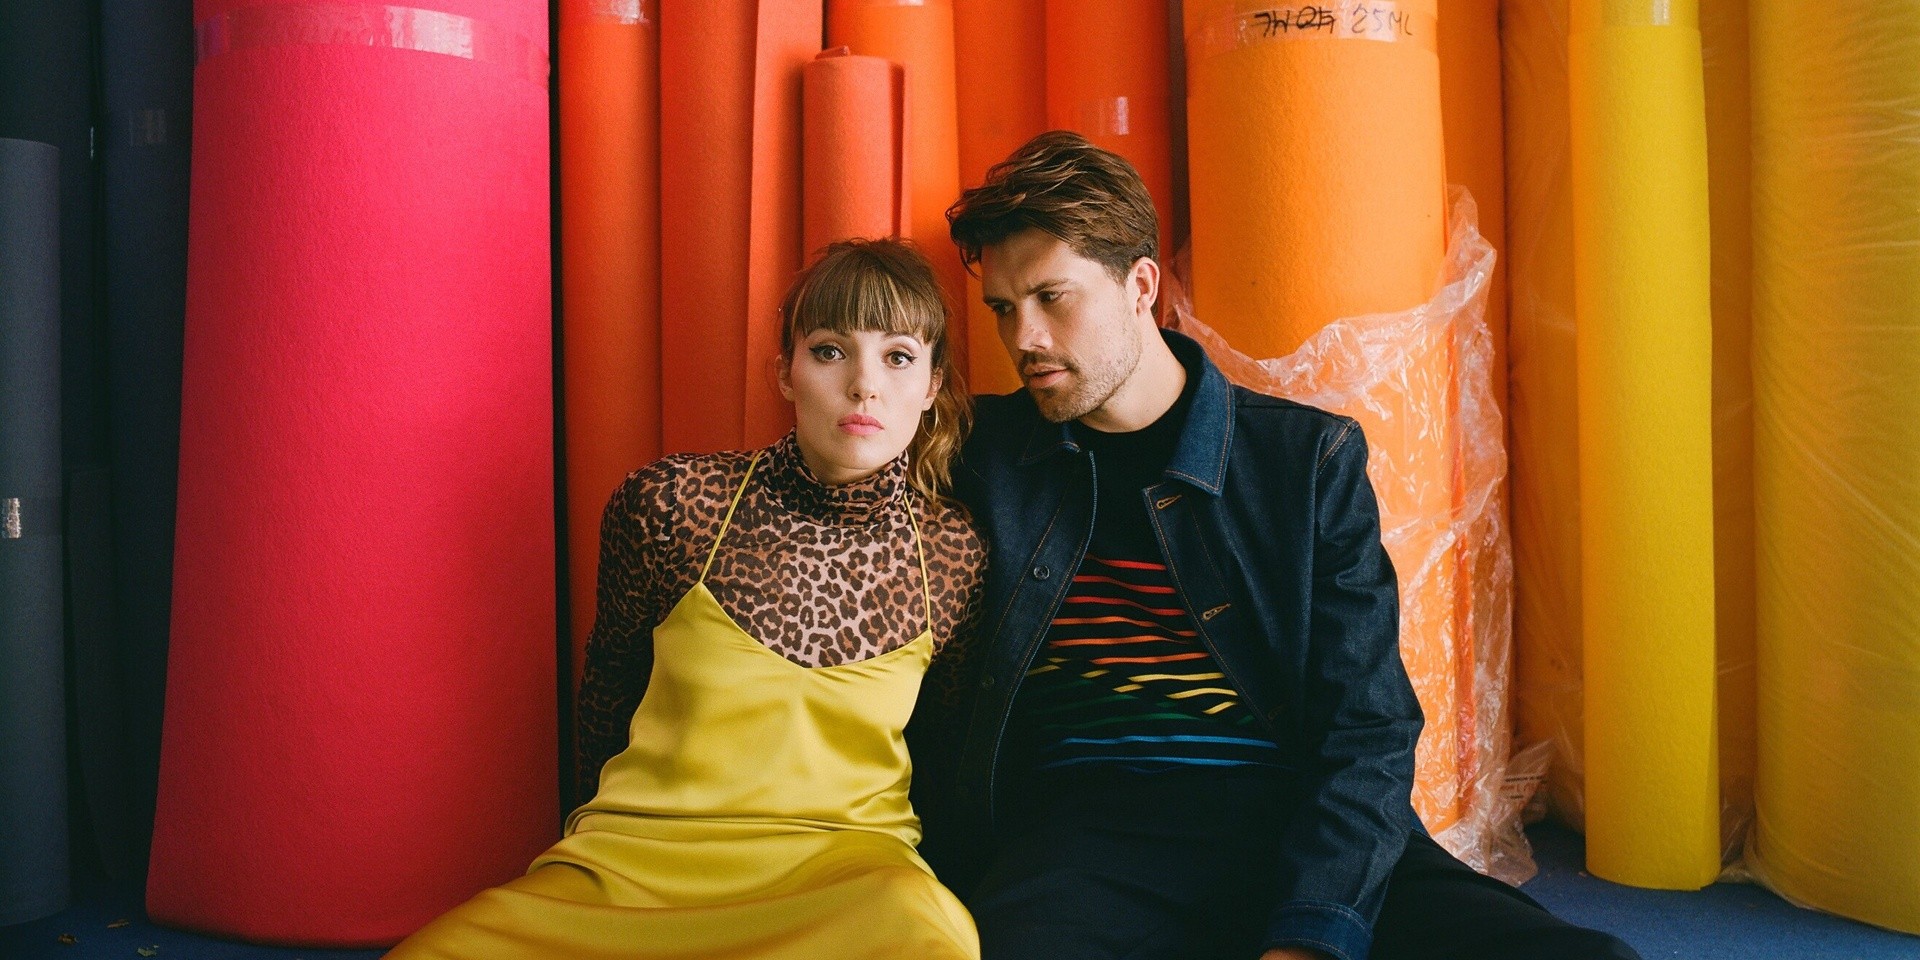 “Making music is the best bit in your job”: An interview with Oh Wonder